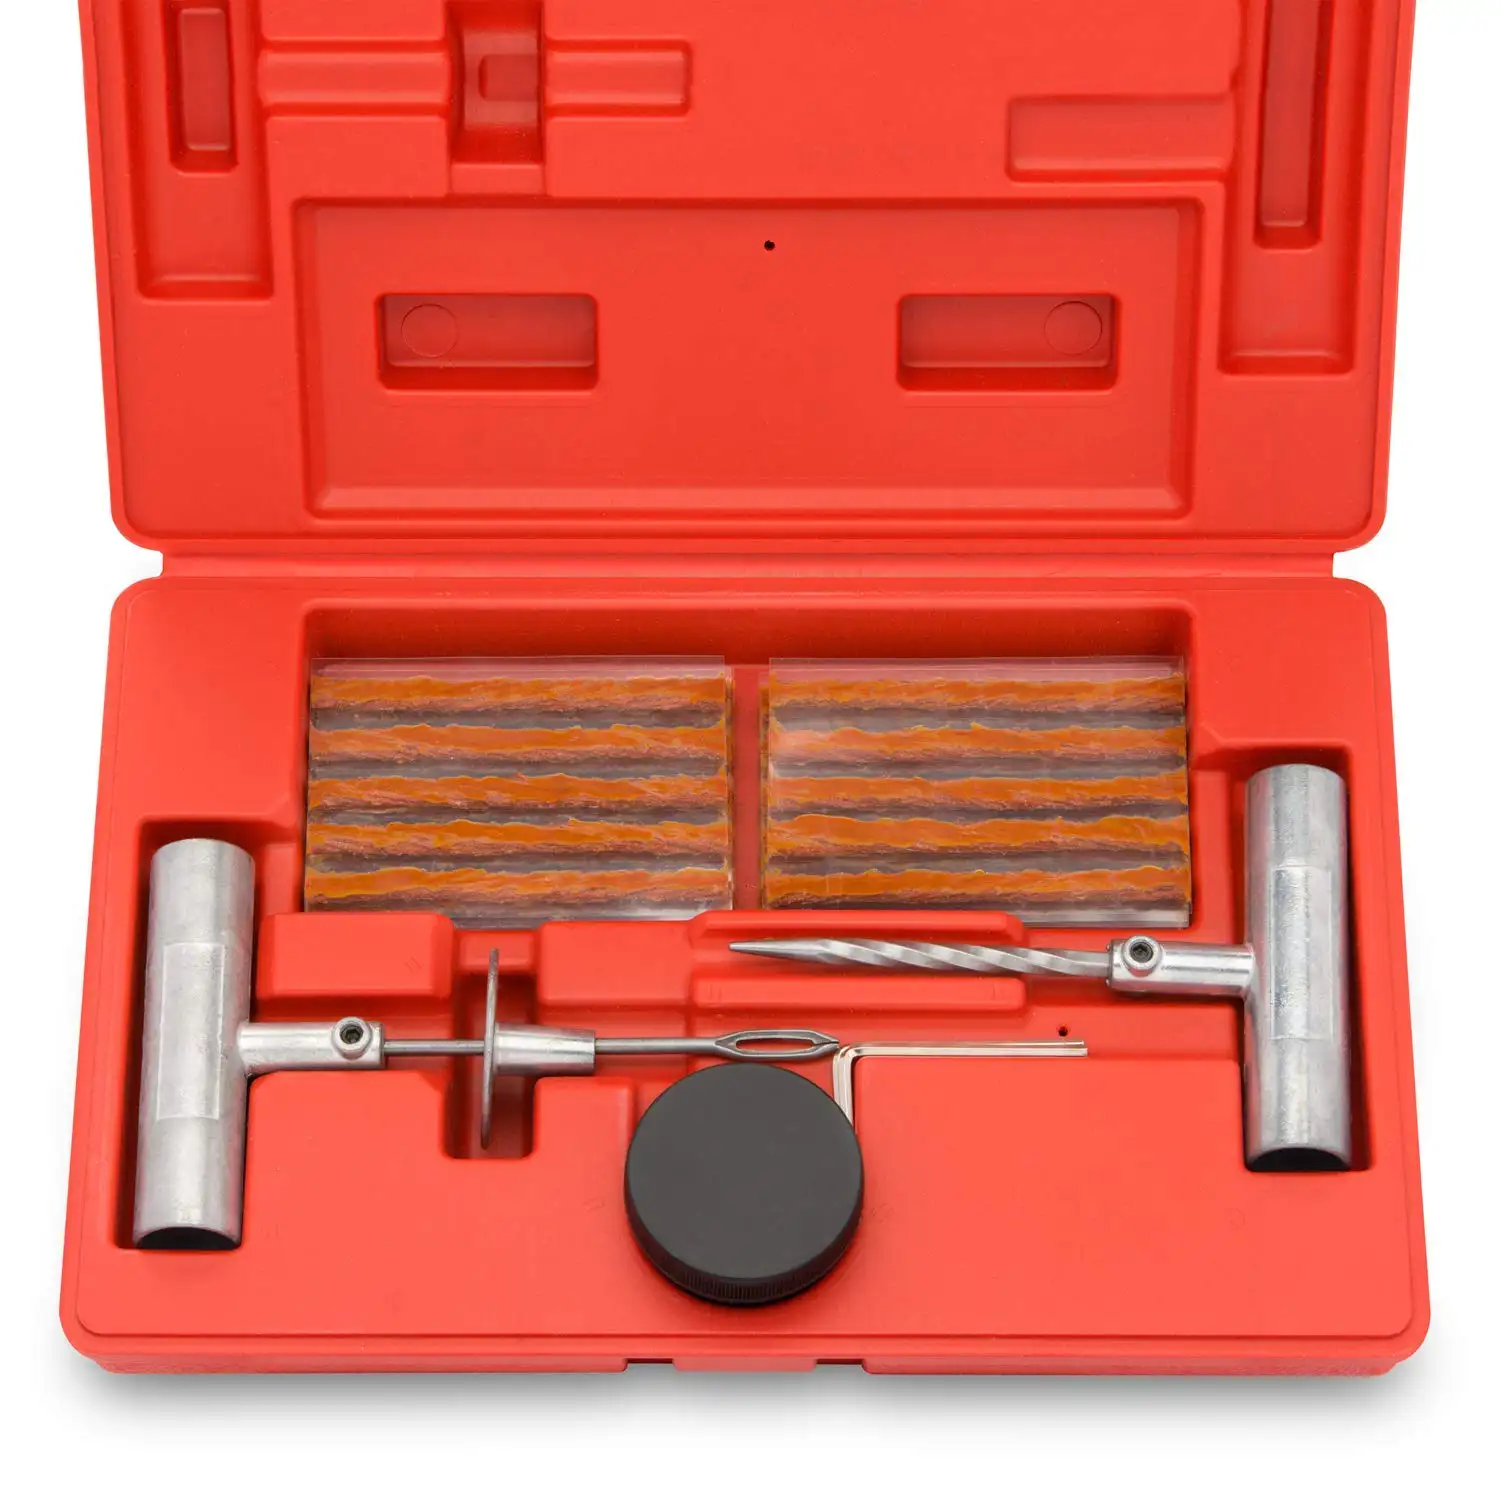 Heavy duty tire repair tool kit with tire repair plug safe hand tools